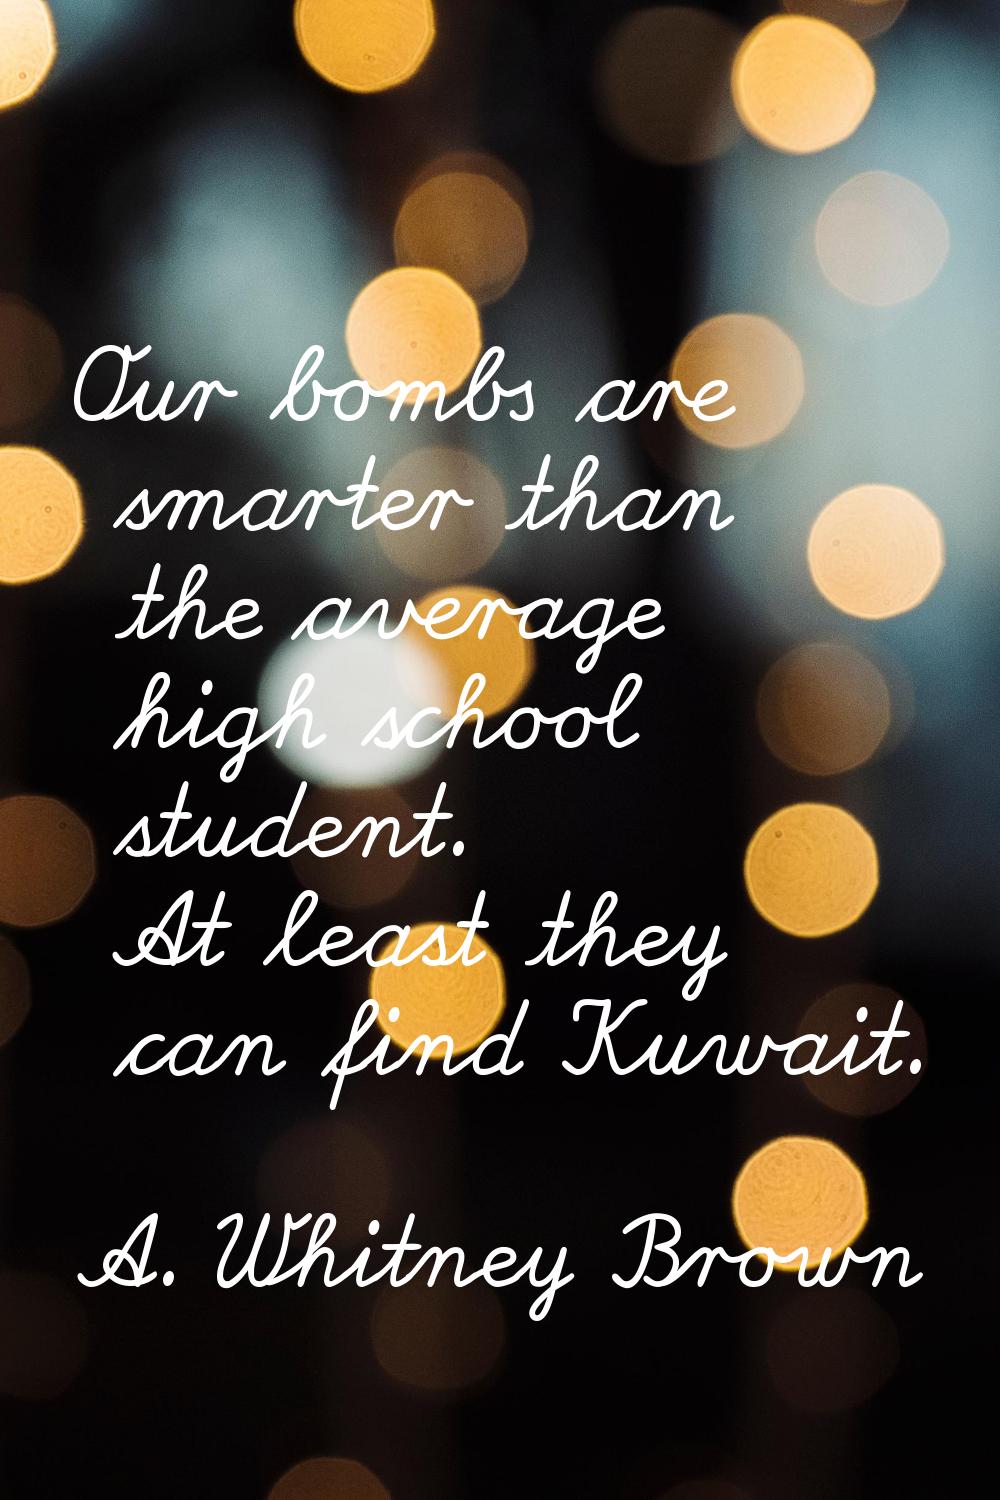 Our bombs are smarter than the average high school student. At least they can find Kuwait.